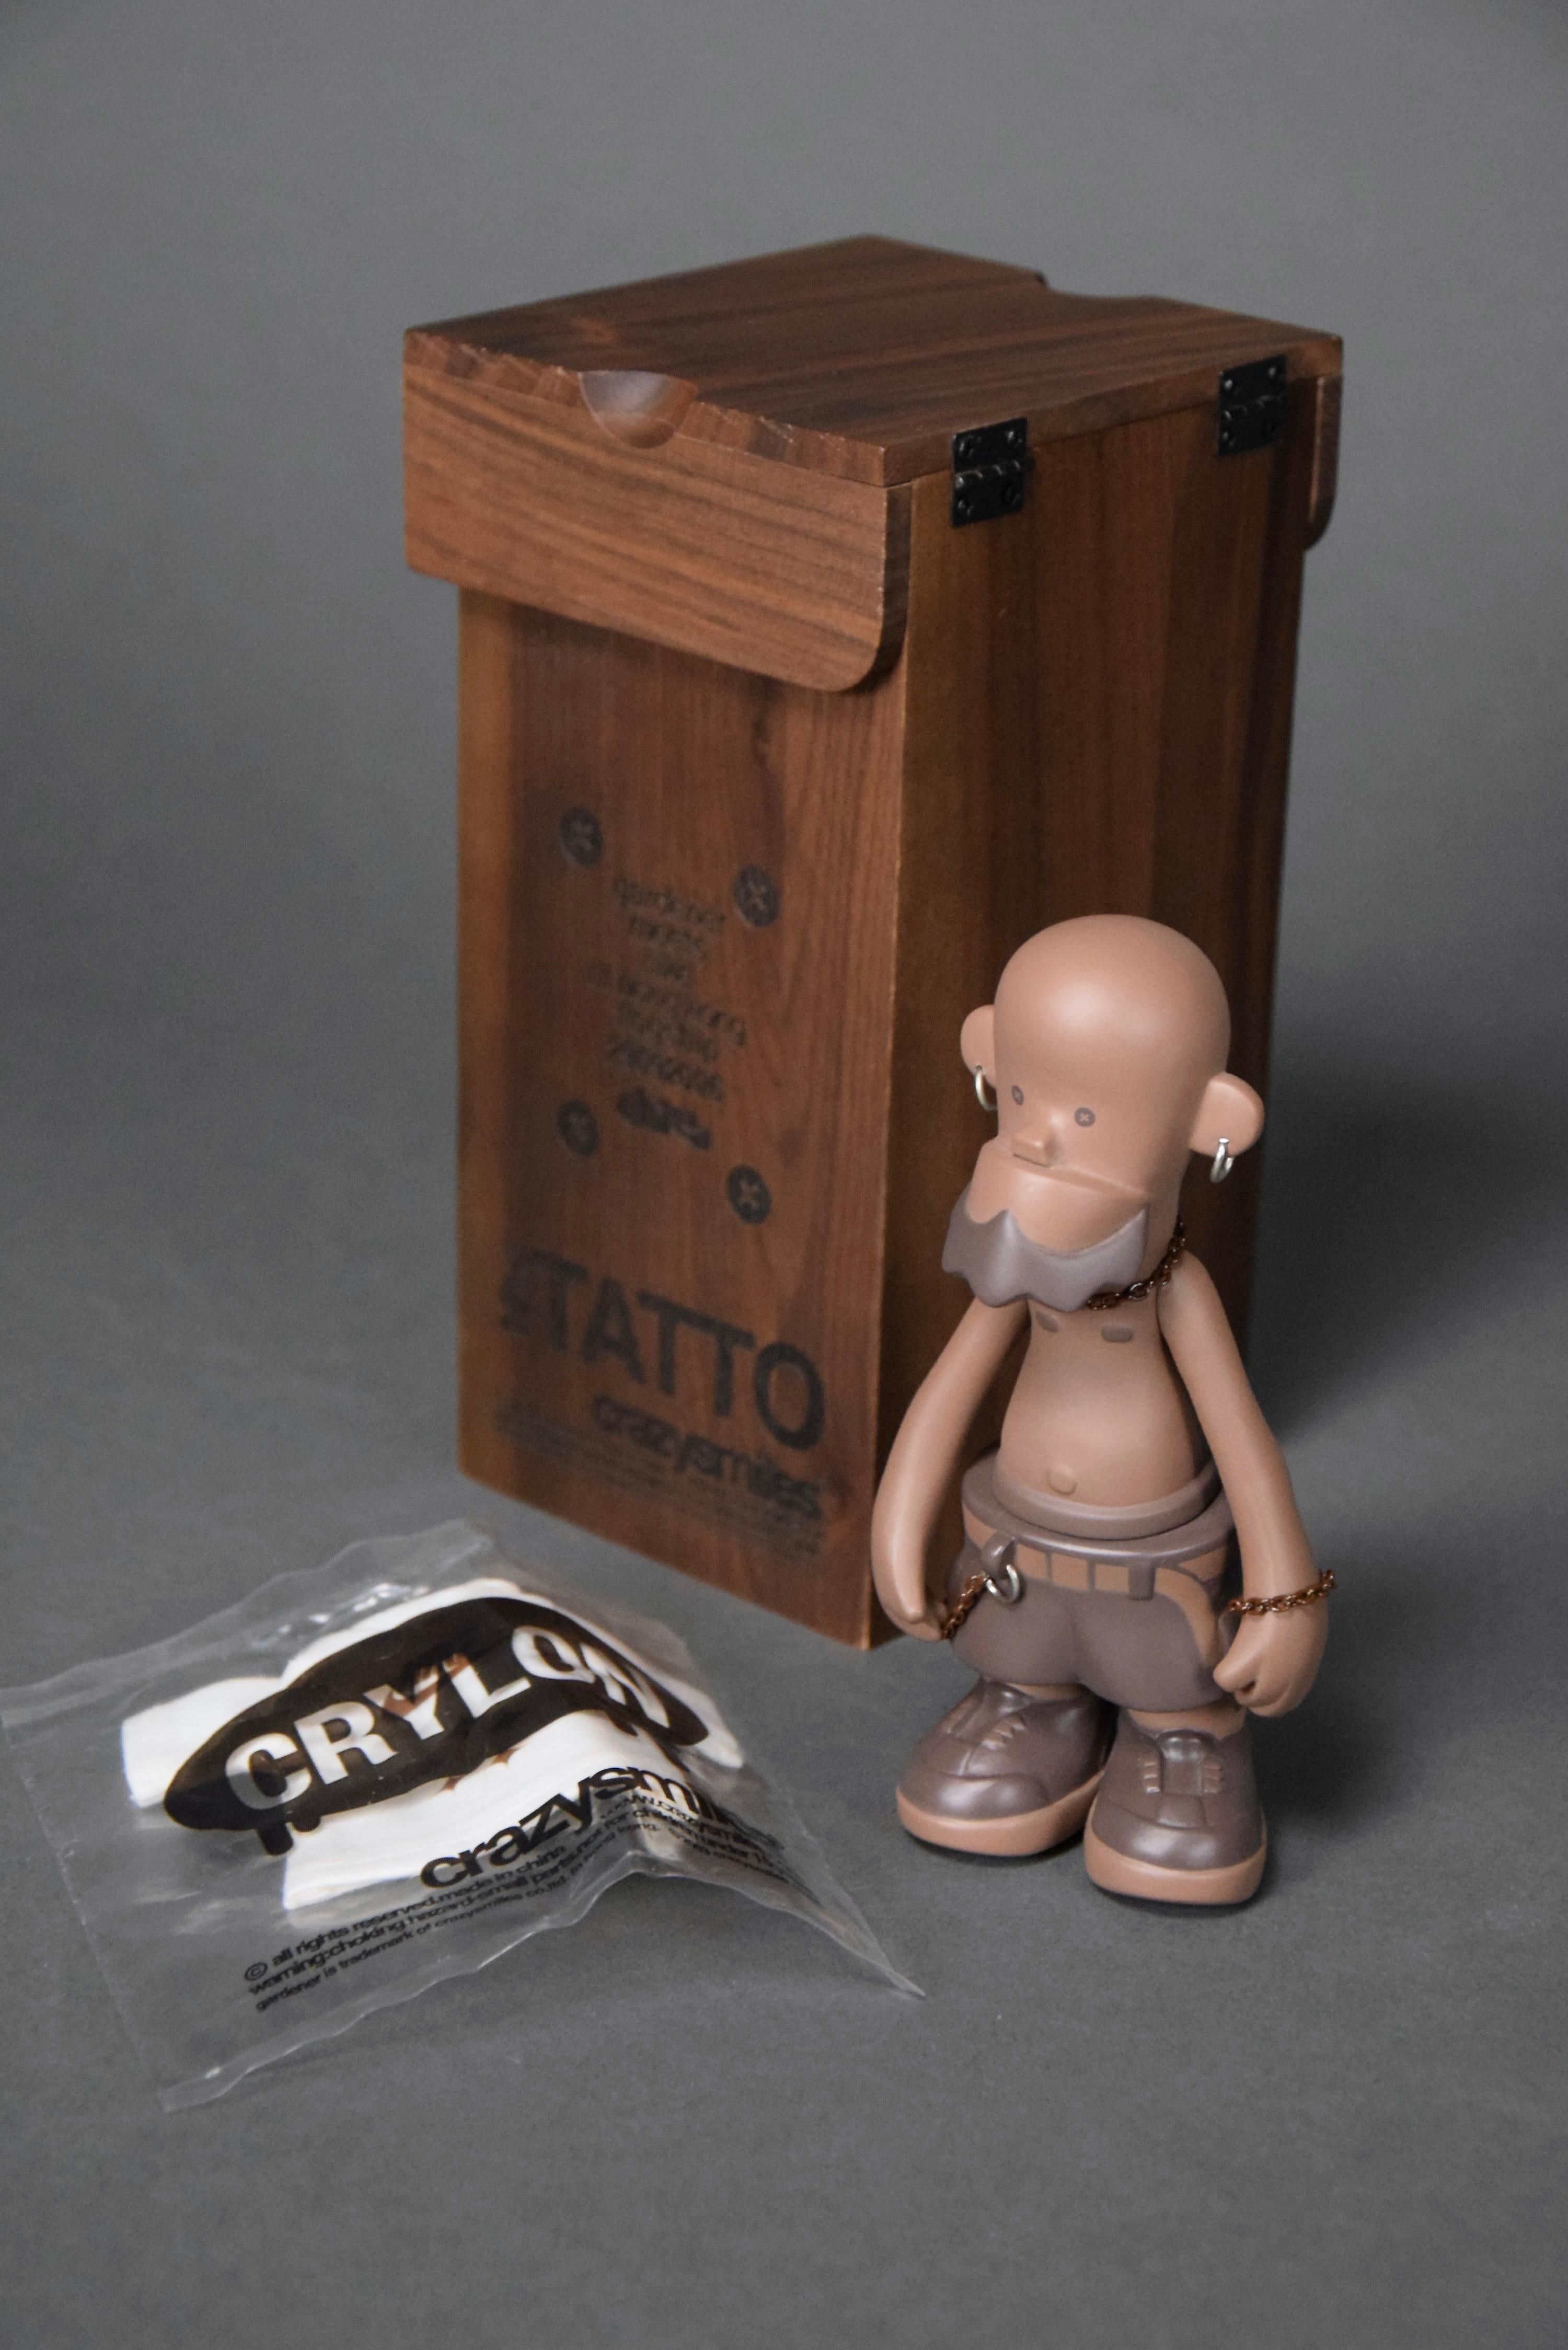 Tatto Limited Edition Gardener Meets NIKE 2006 Designer Toy For Sale 1